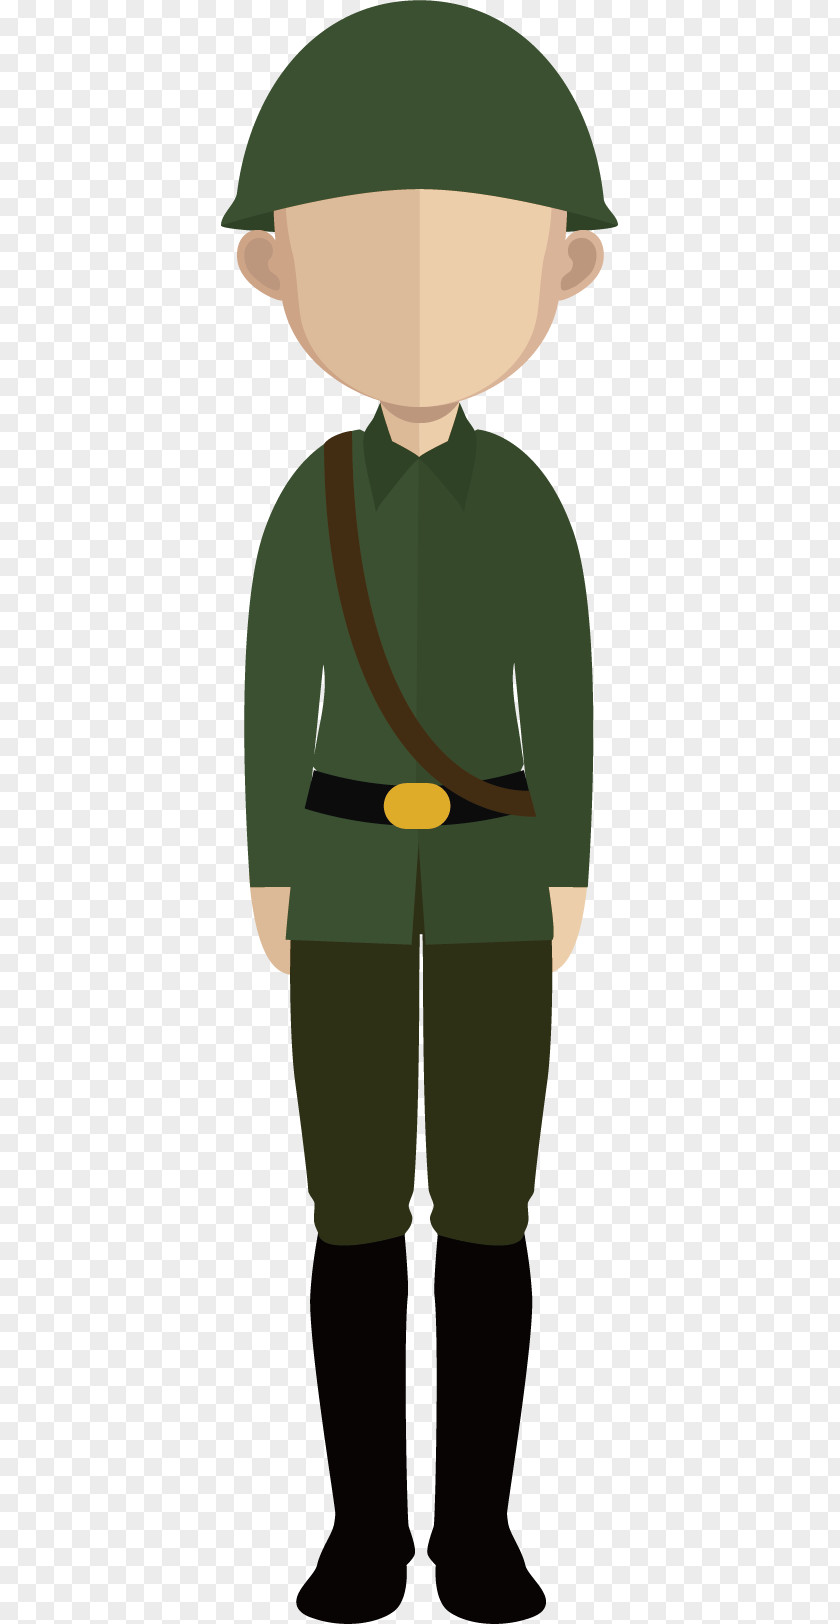 The Army Field Drawing Animation Illustration PNG